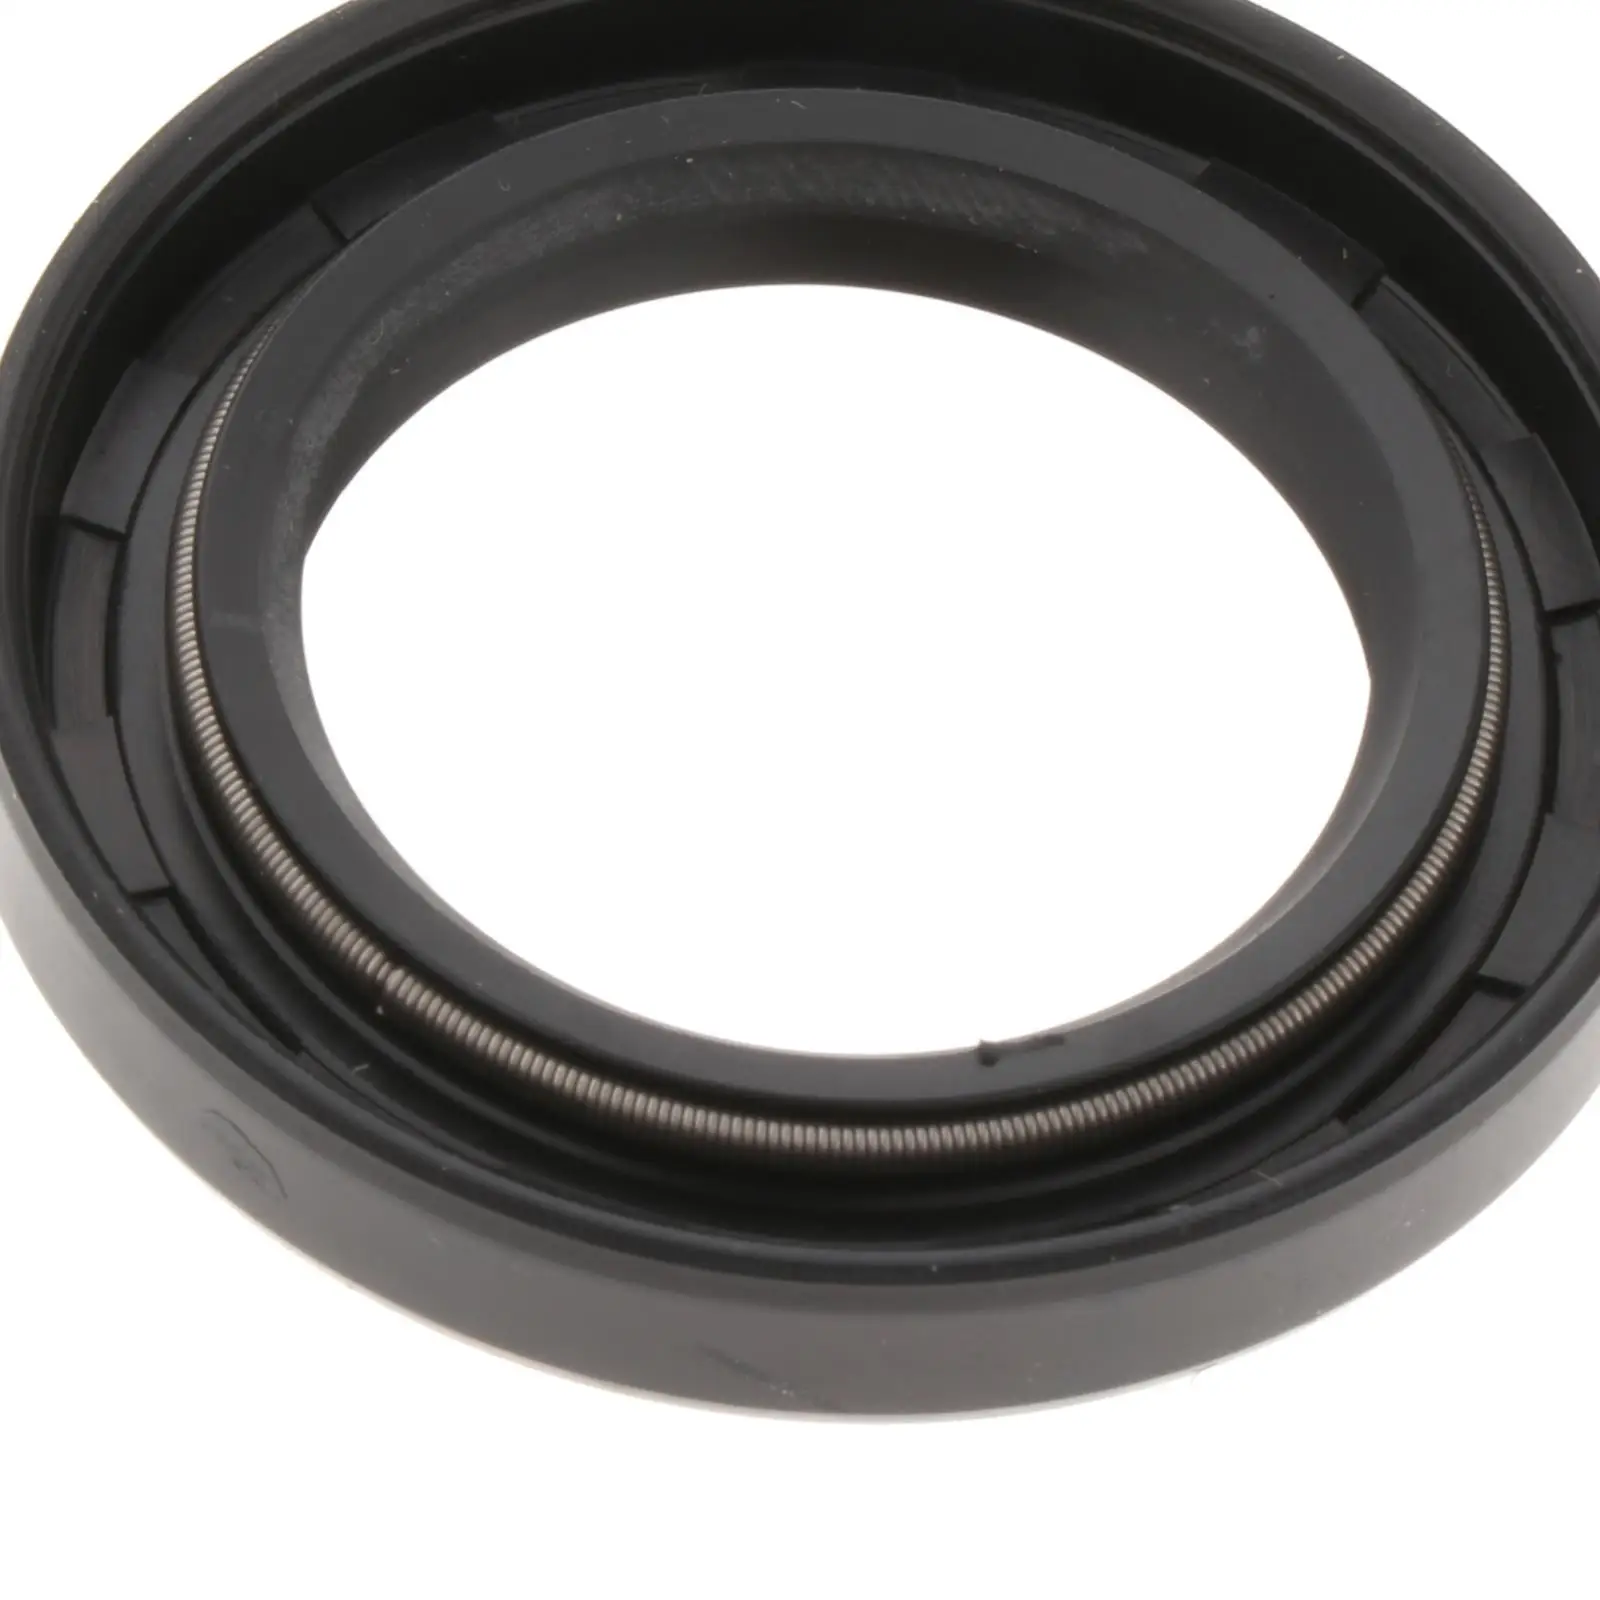 Oil Seal, 93102-30M23, Fit for Yamaha Outboard Motor 2T 60HP-90HP Accessory